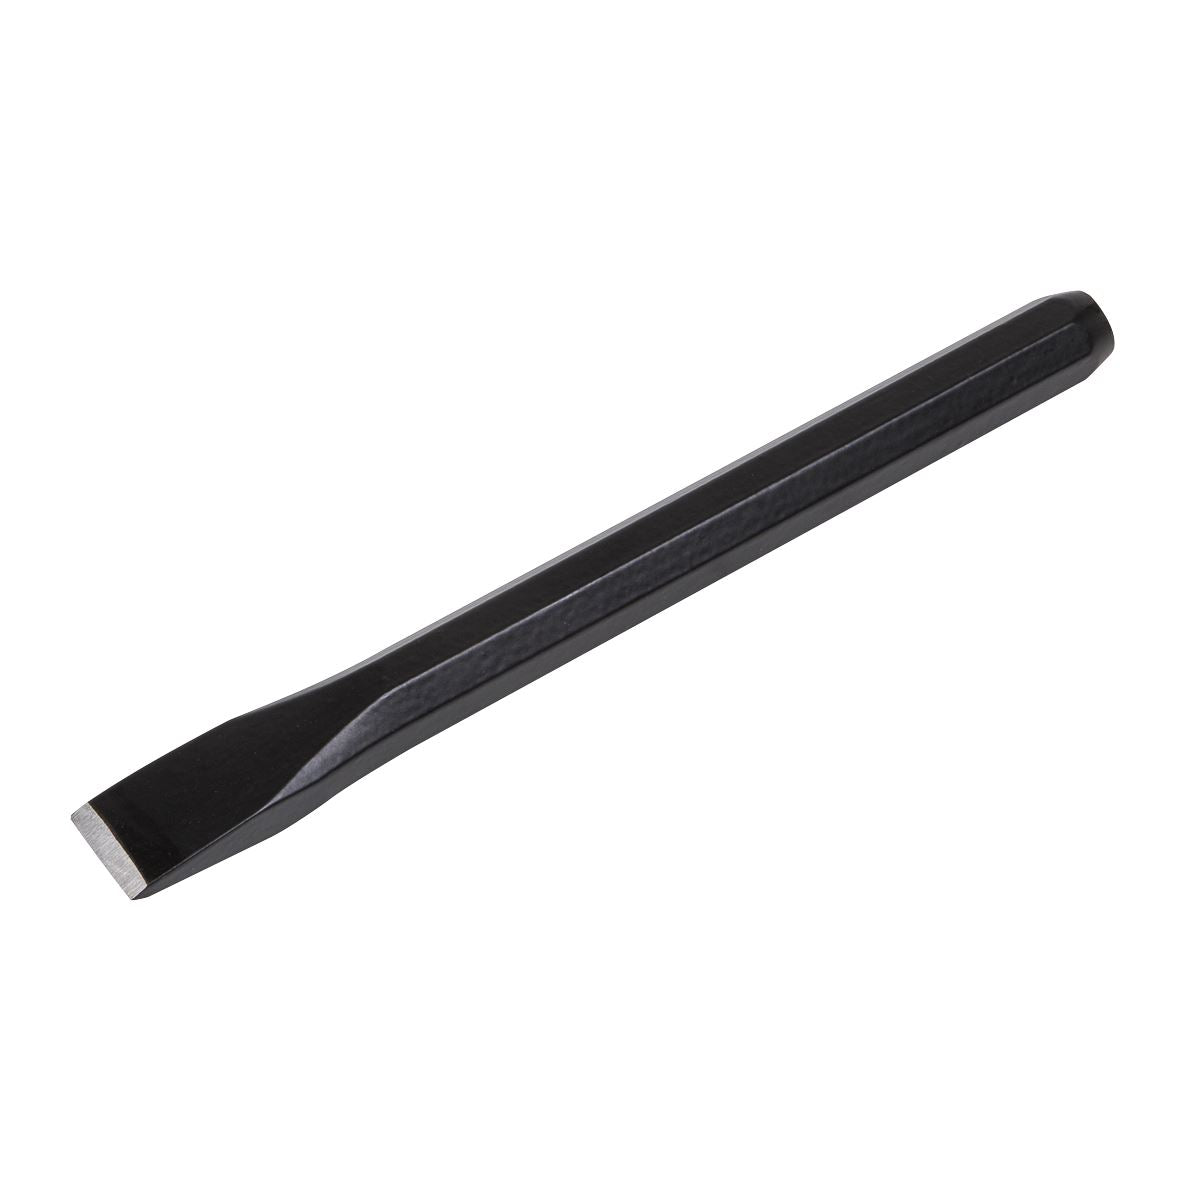 Sealey Cold Chisel 19 x 200mm